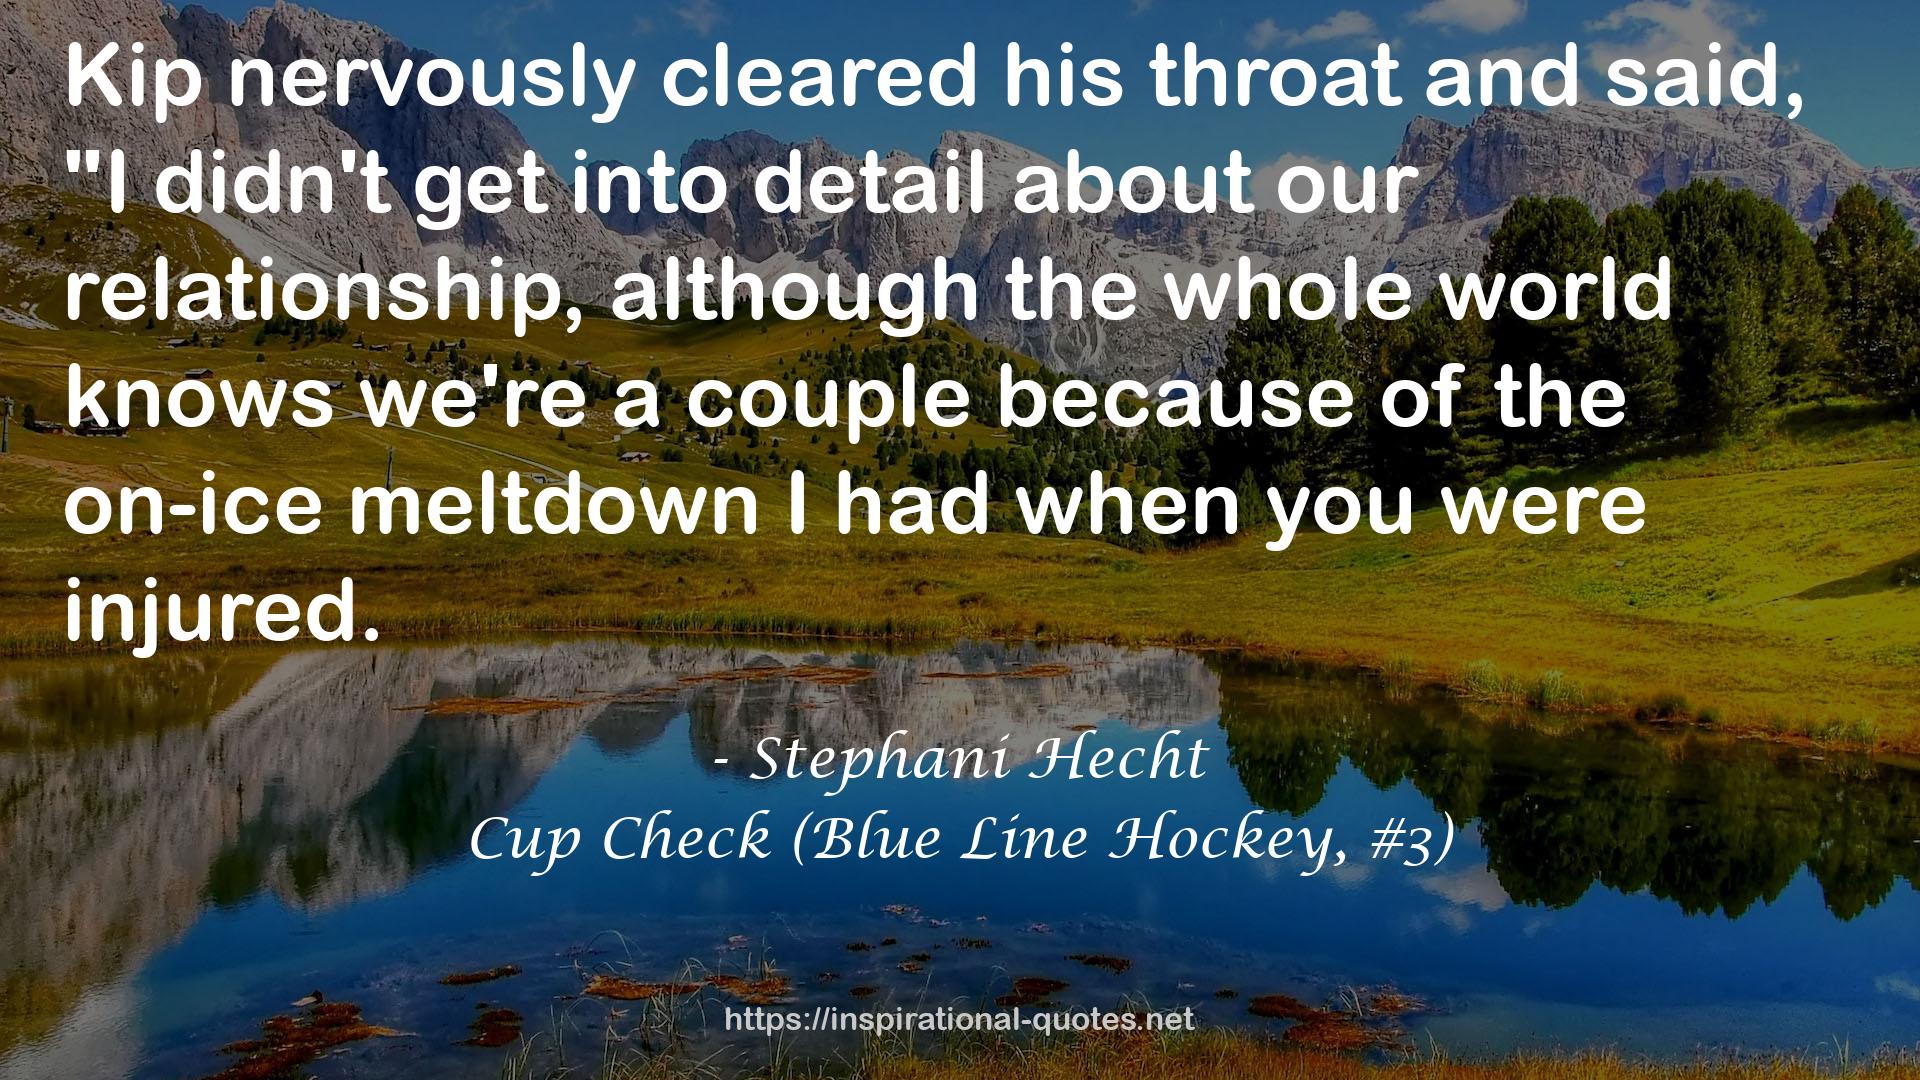 Cup Check (Blue Line Hockey, #3) QUOTES